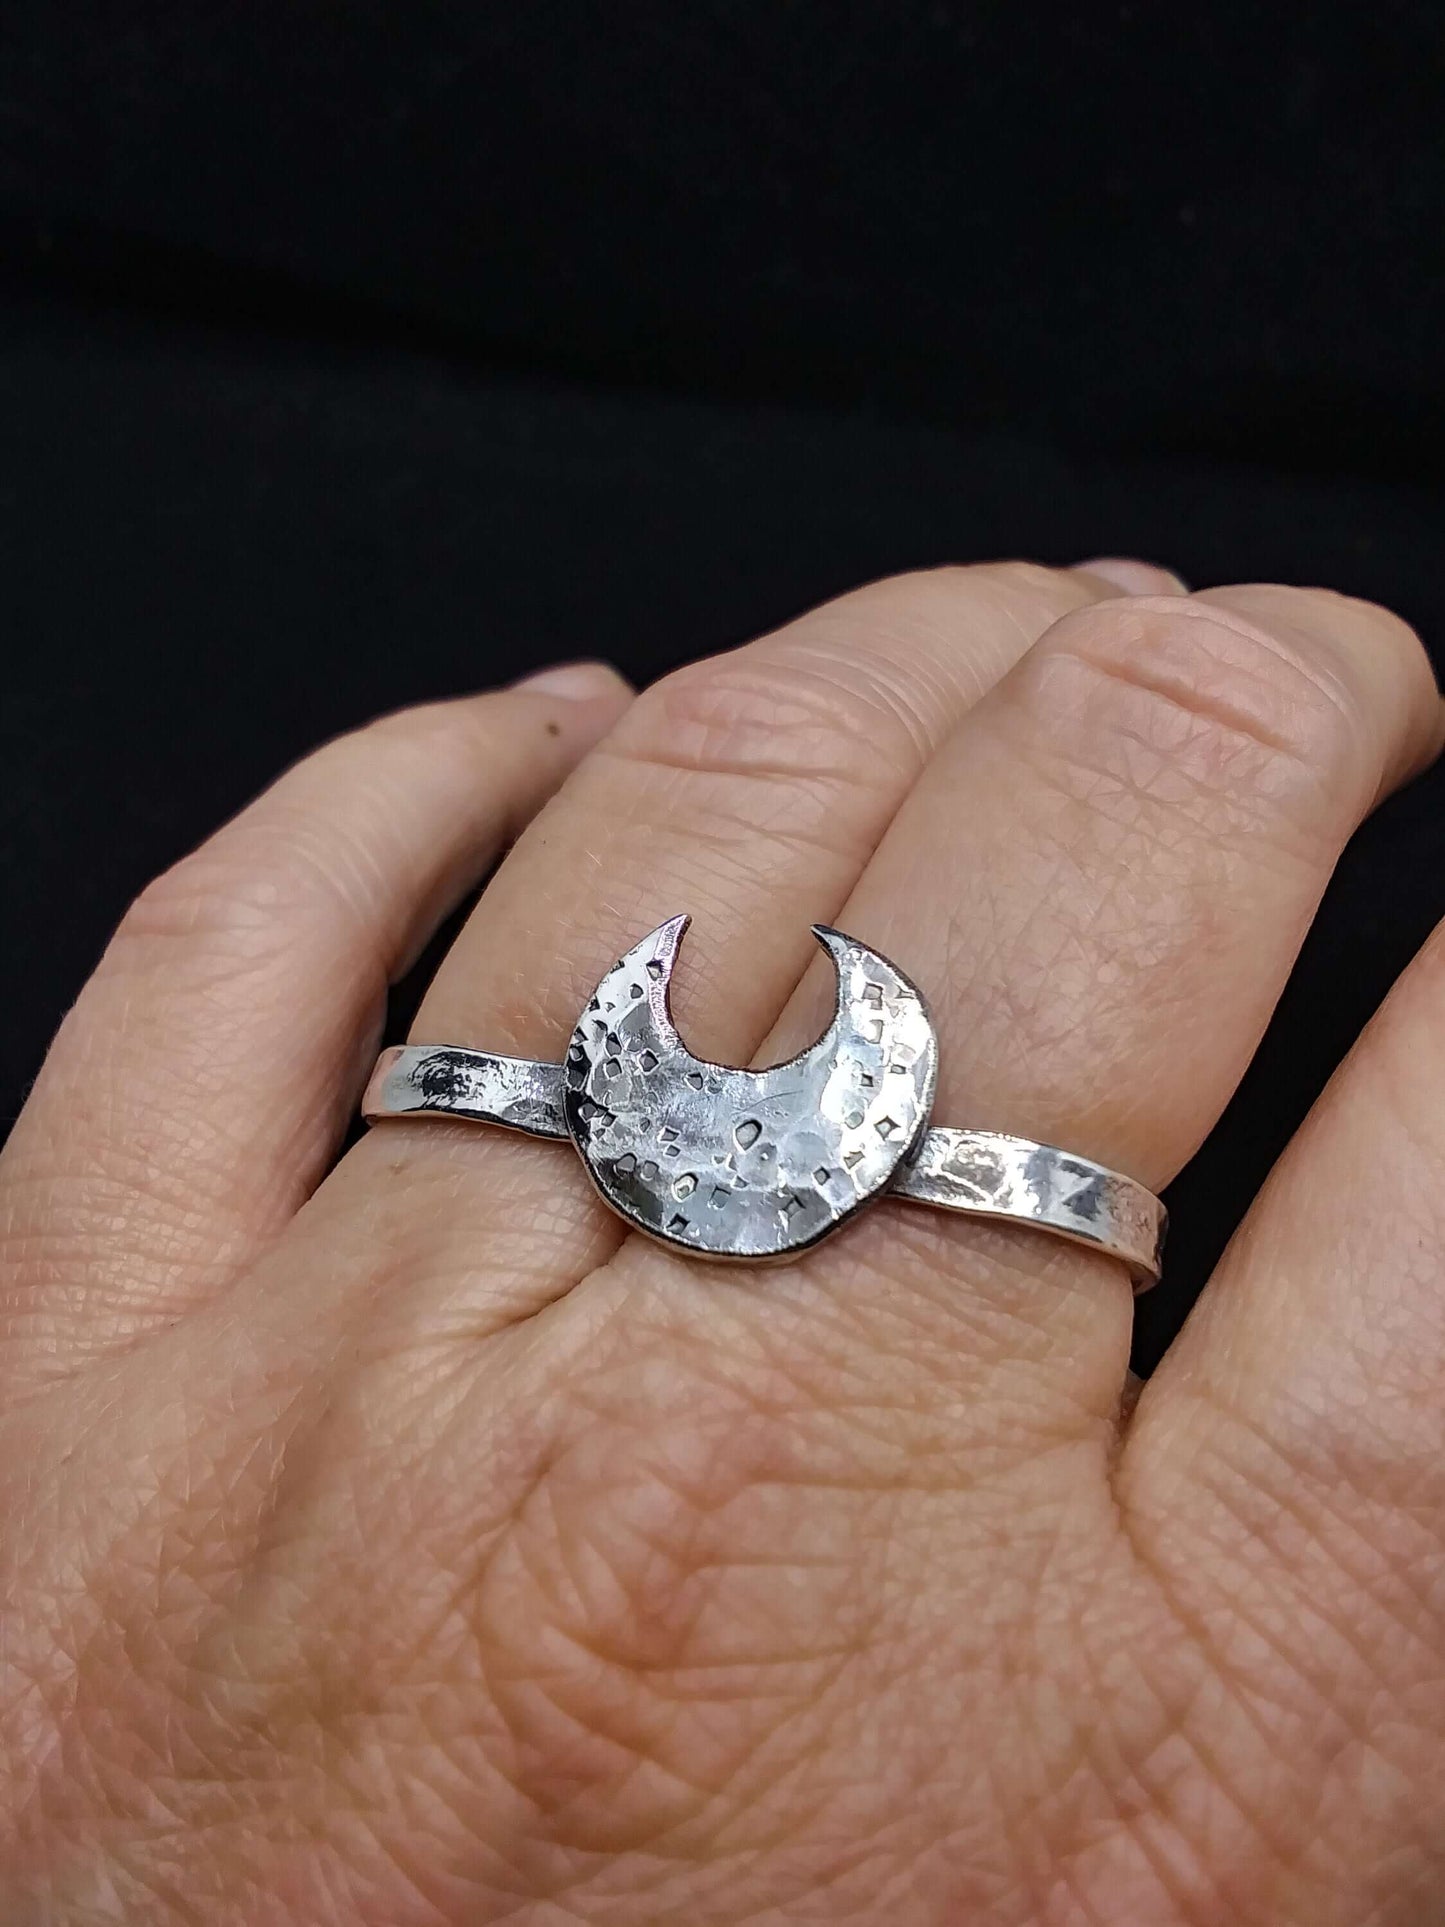 Top view of a silver double ring with a crescent moon that has hammered texturing on a hand with folded fingers.